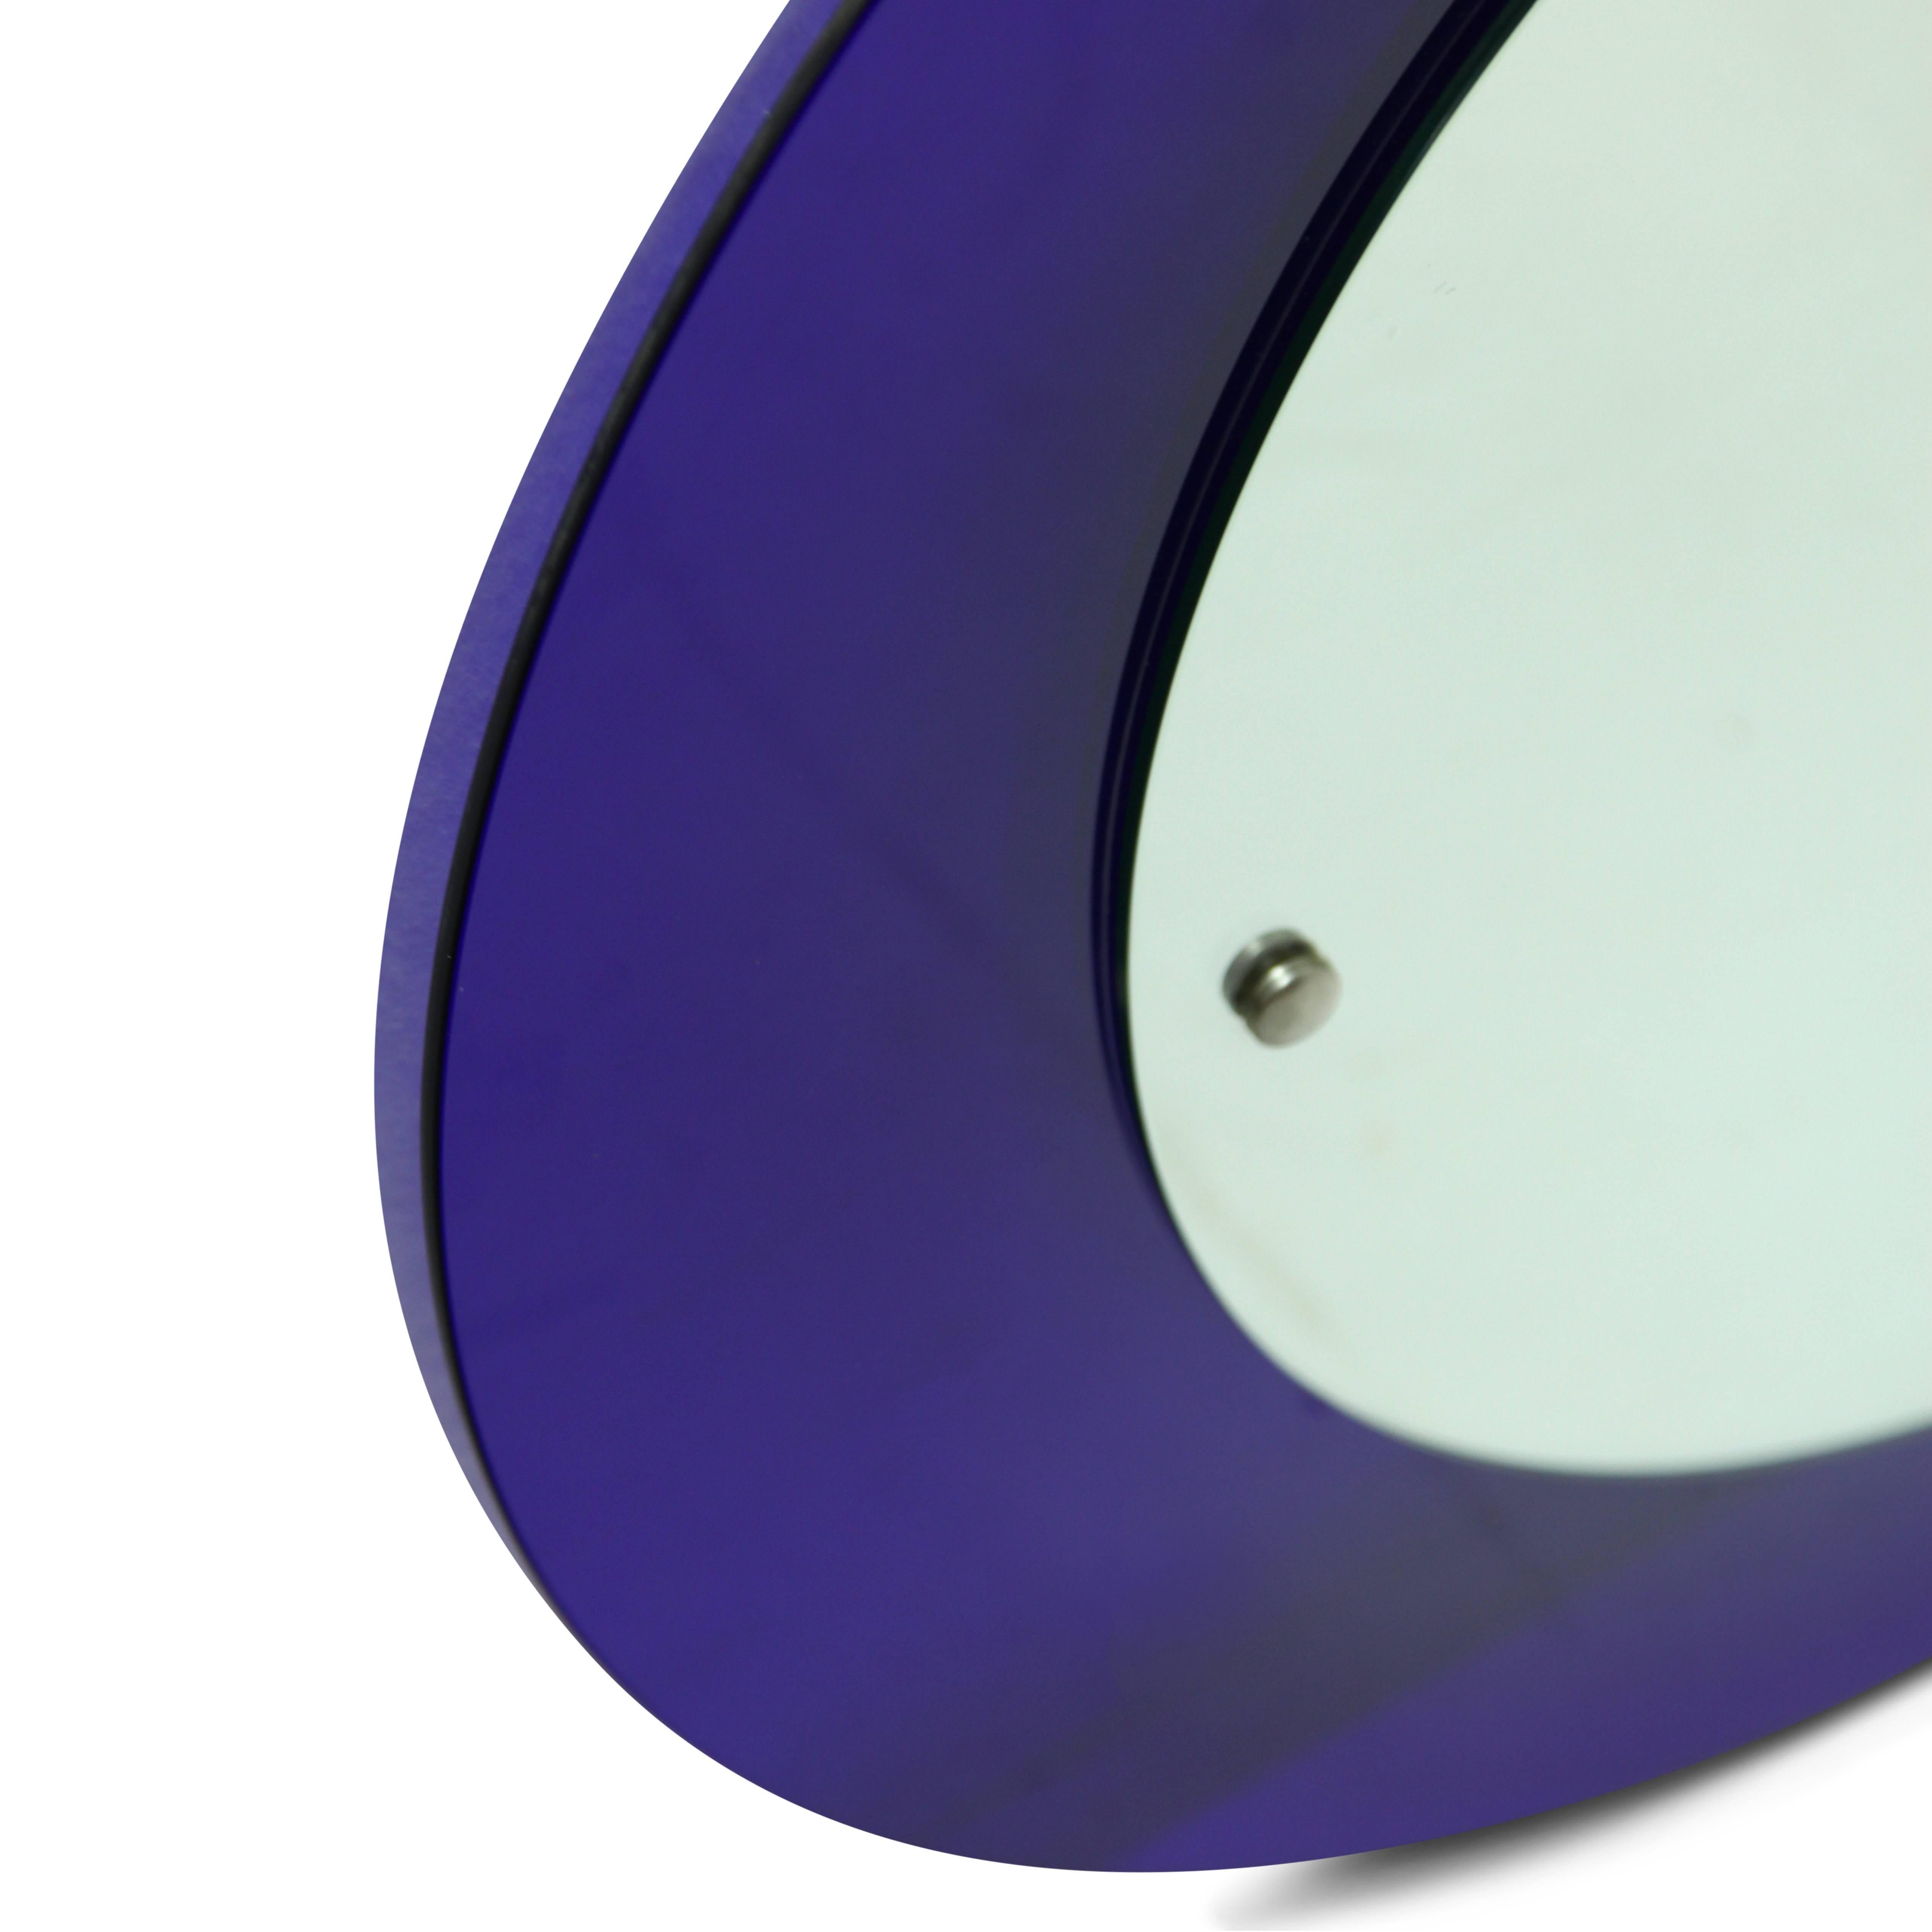 Round wall mirror with a blue glass frame, the mirror pane is slightly off to the right.